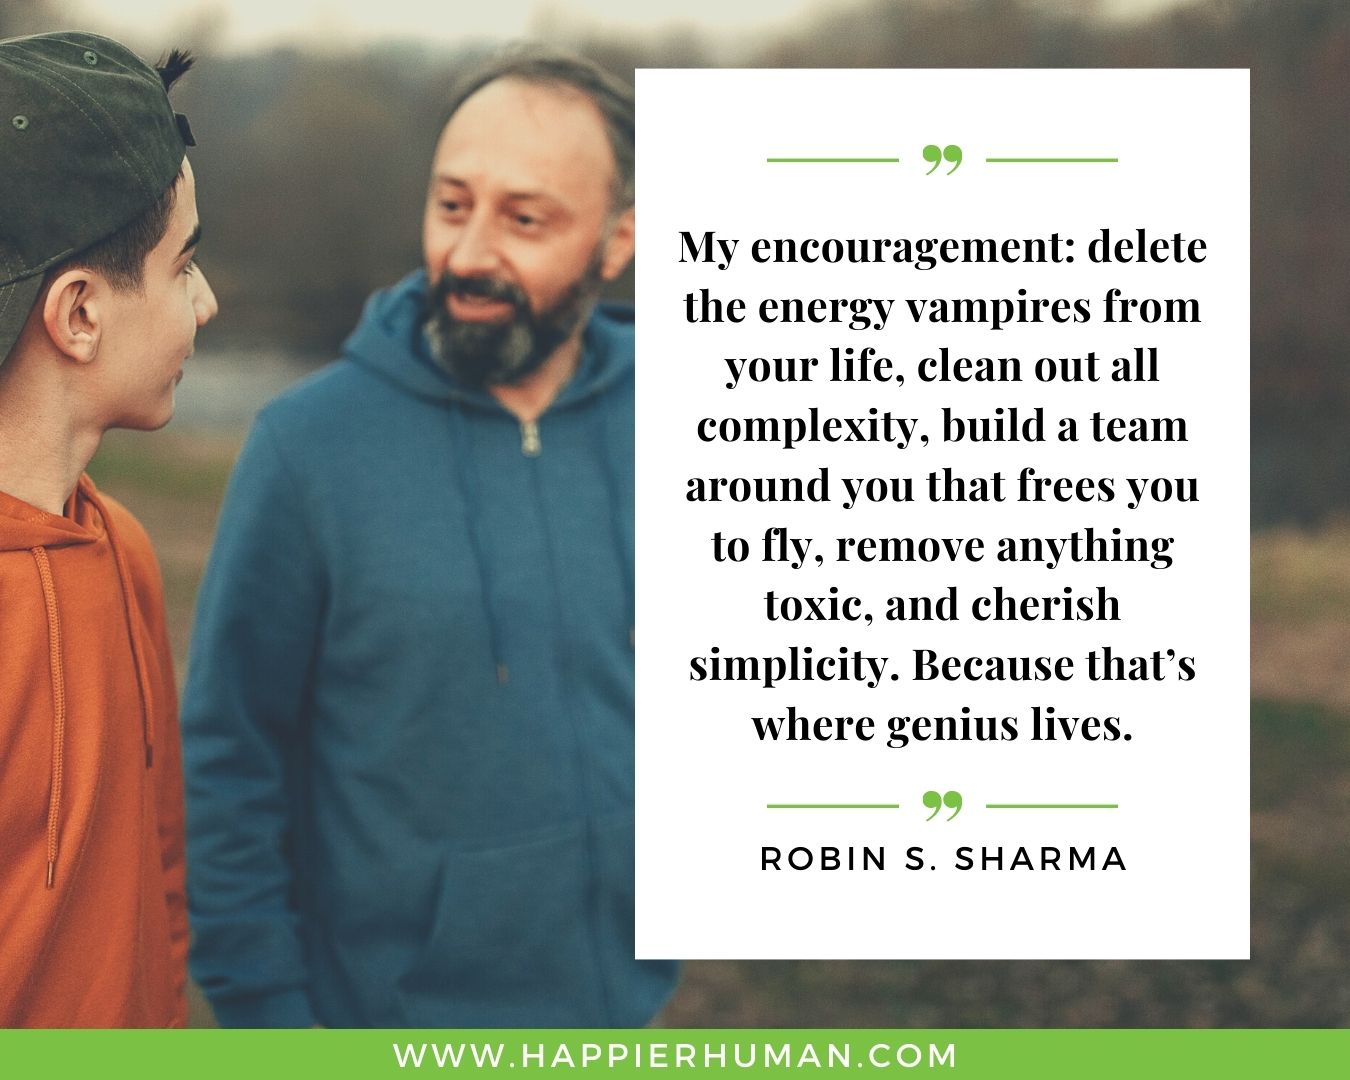 Toxic People Quotes - “My encouragement: delete the energy vampires from your life, clean out all complexity, build a team around you that frees you to fly, remove anything toxic, and cherish simplicity. Because that’s where genius lives.” – Robin S. Sharma